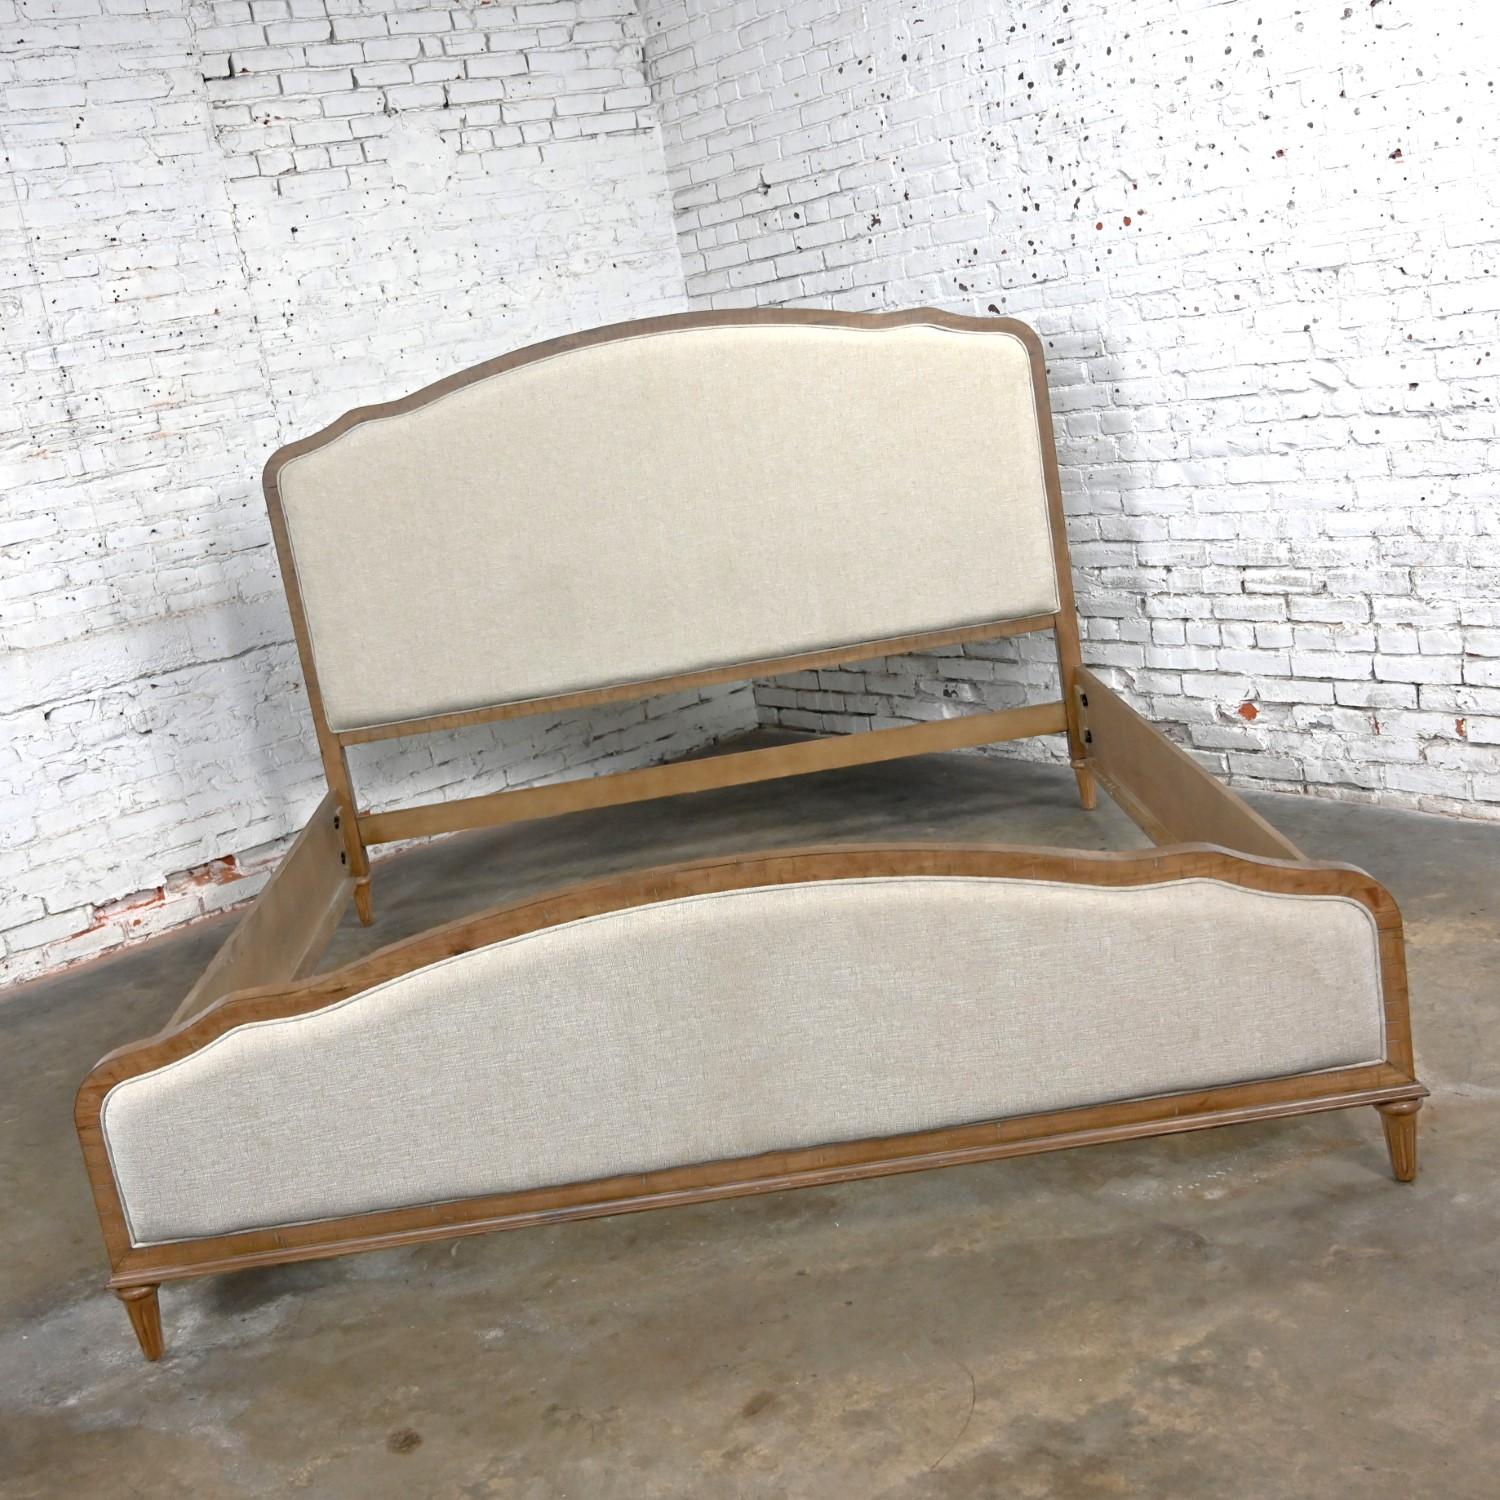 Exquisite Early 21st Century Modern French Country Rustic mahogany king sized upholstered bed including a portman panel headboard, footboard, and side rails. Beautiful condition, keeping in mind that this is vintage and not new so will have signs of